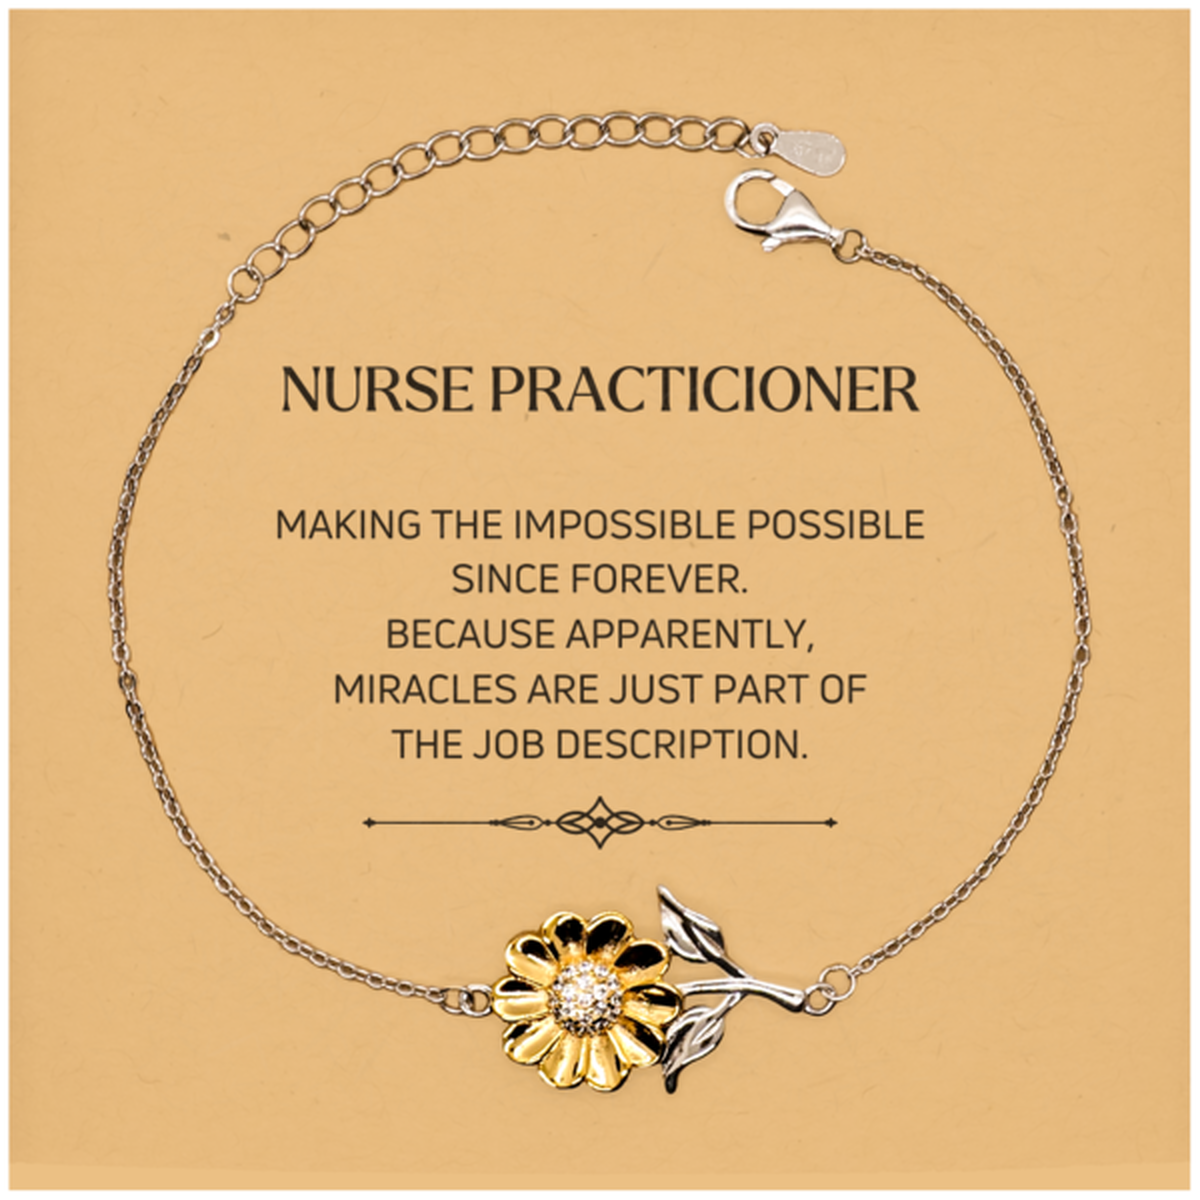 Funny Nurse Practicioner Gifts, Miracles are just part of the job description, Inspirational Birthday Christmas Sunflower Bracelet For Nurse Practicioner, Men, Women, Coworkers, Friends, Boss